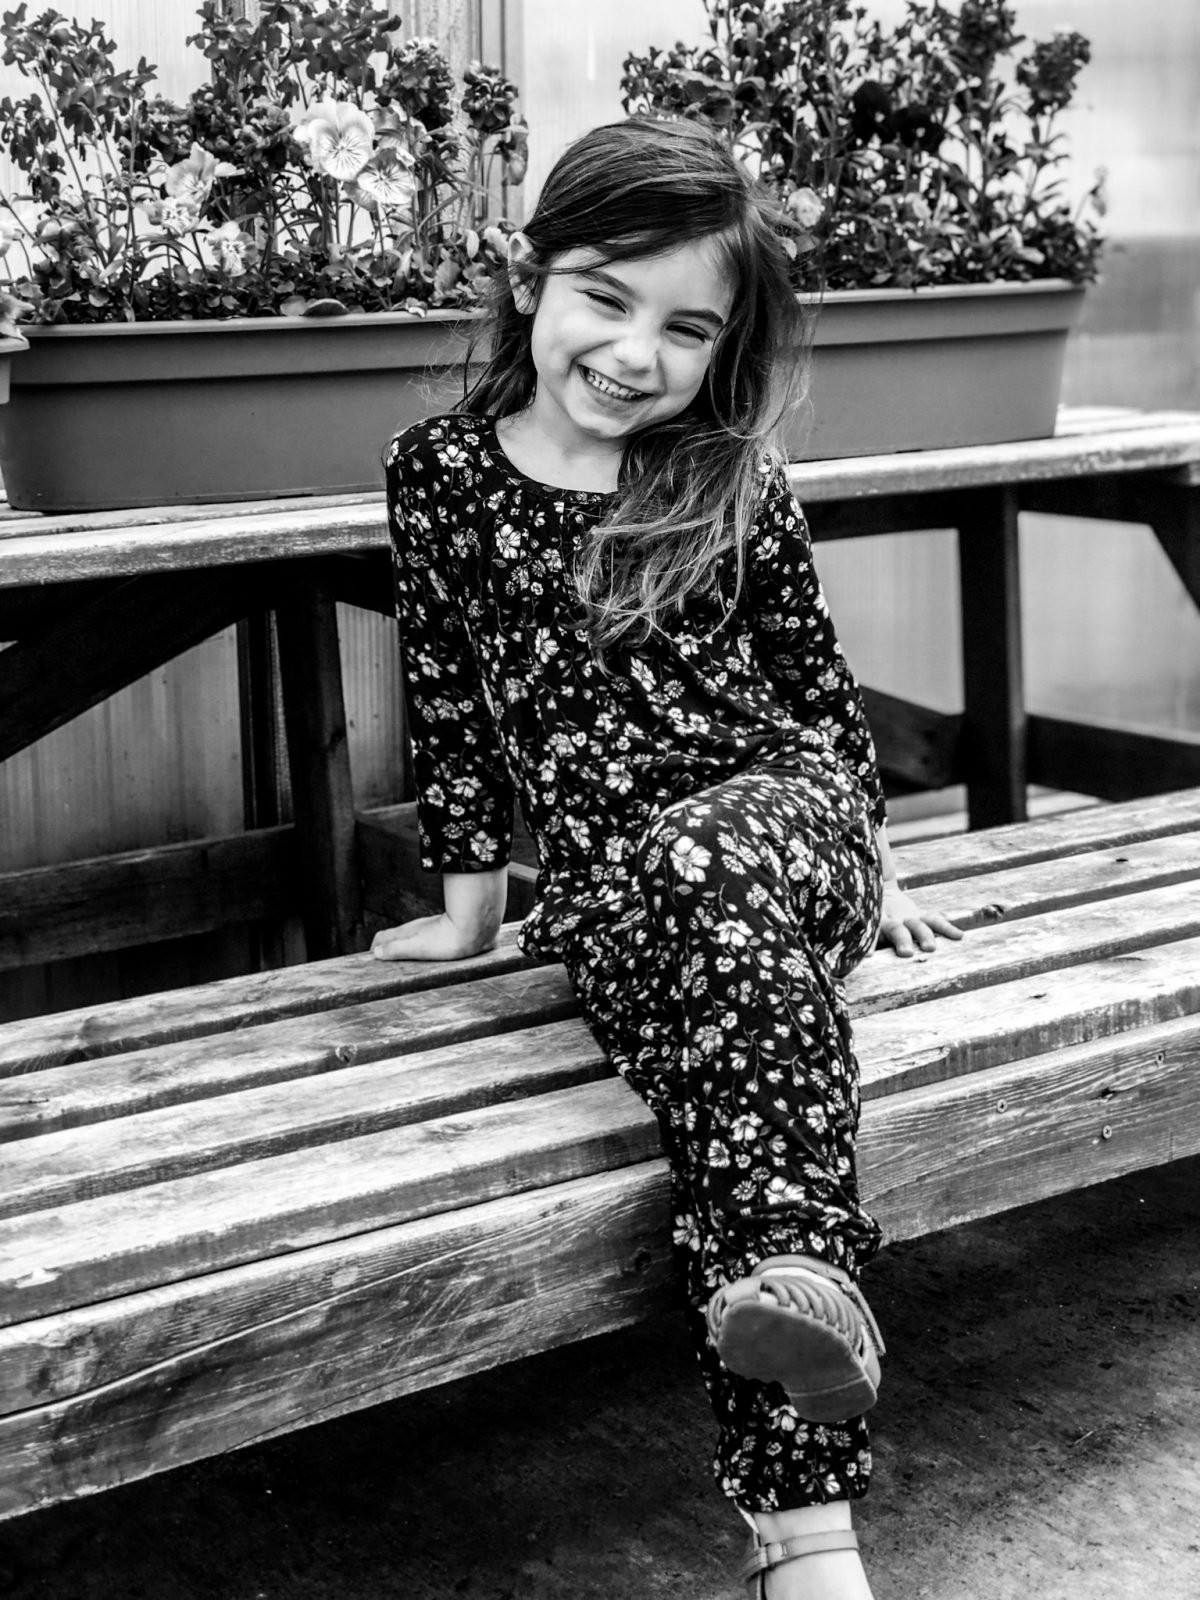 smiling little girl sitting on a bench in black and white